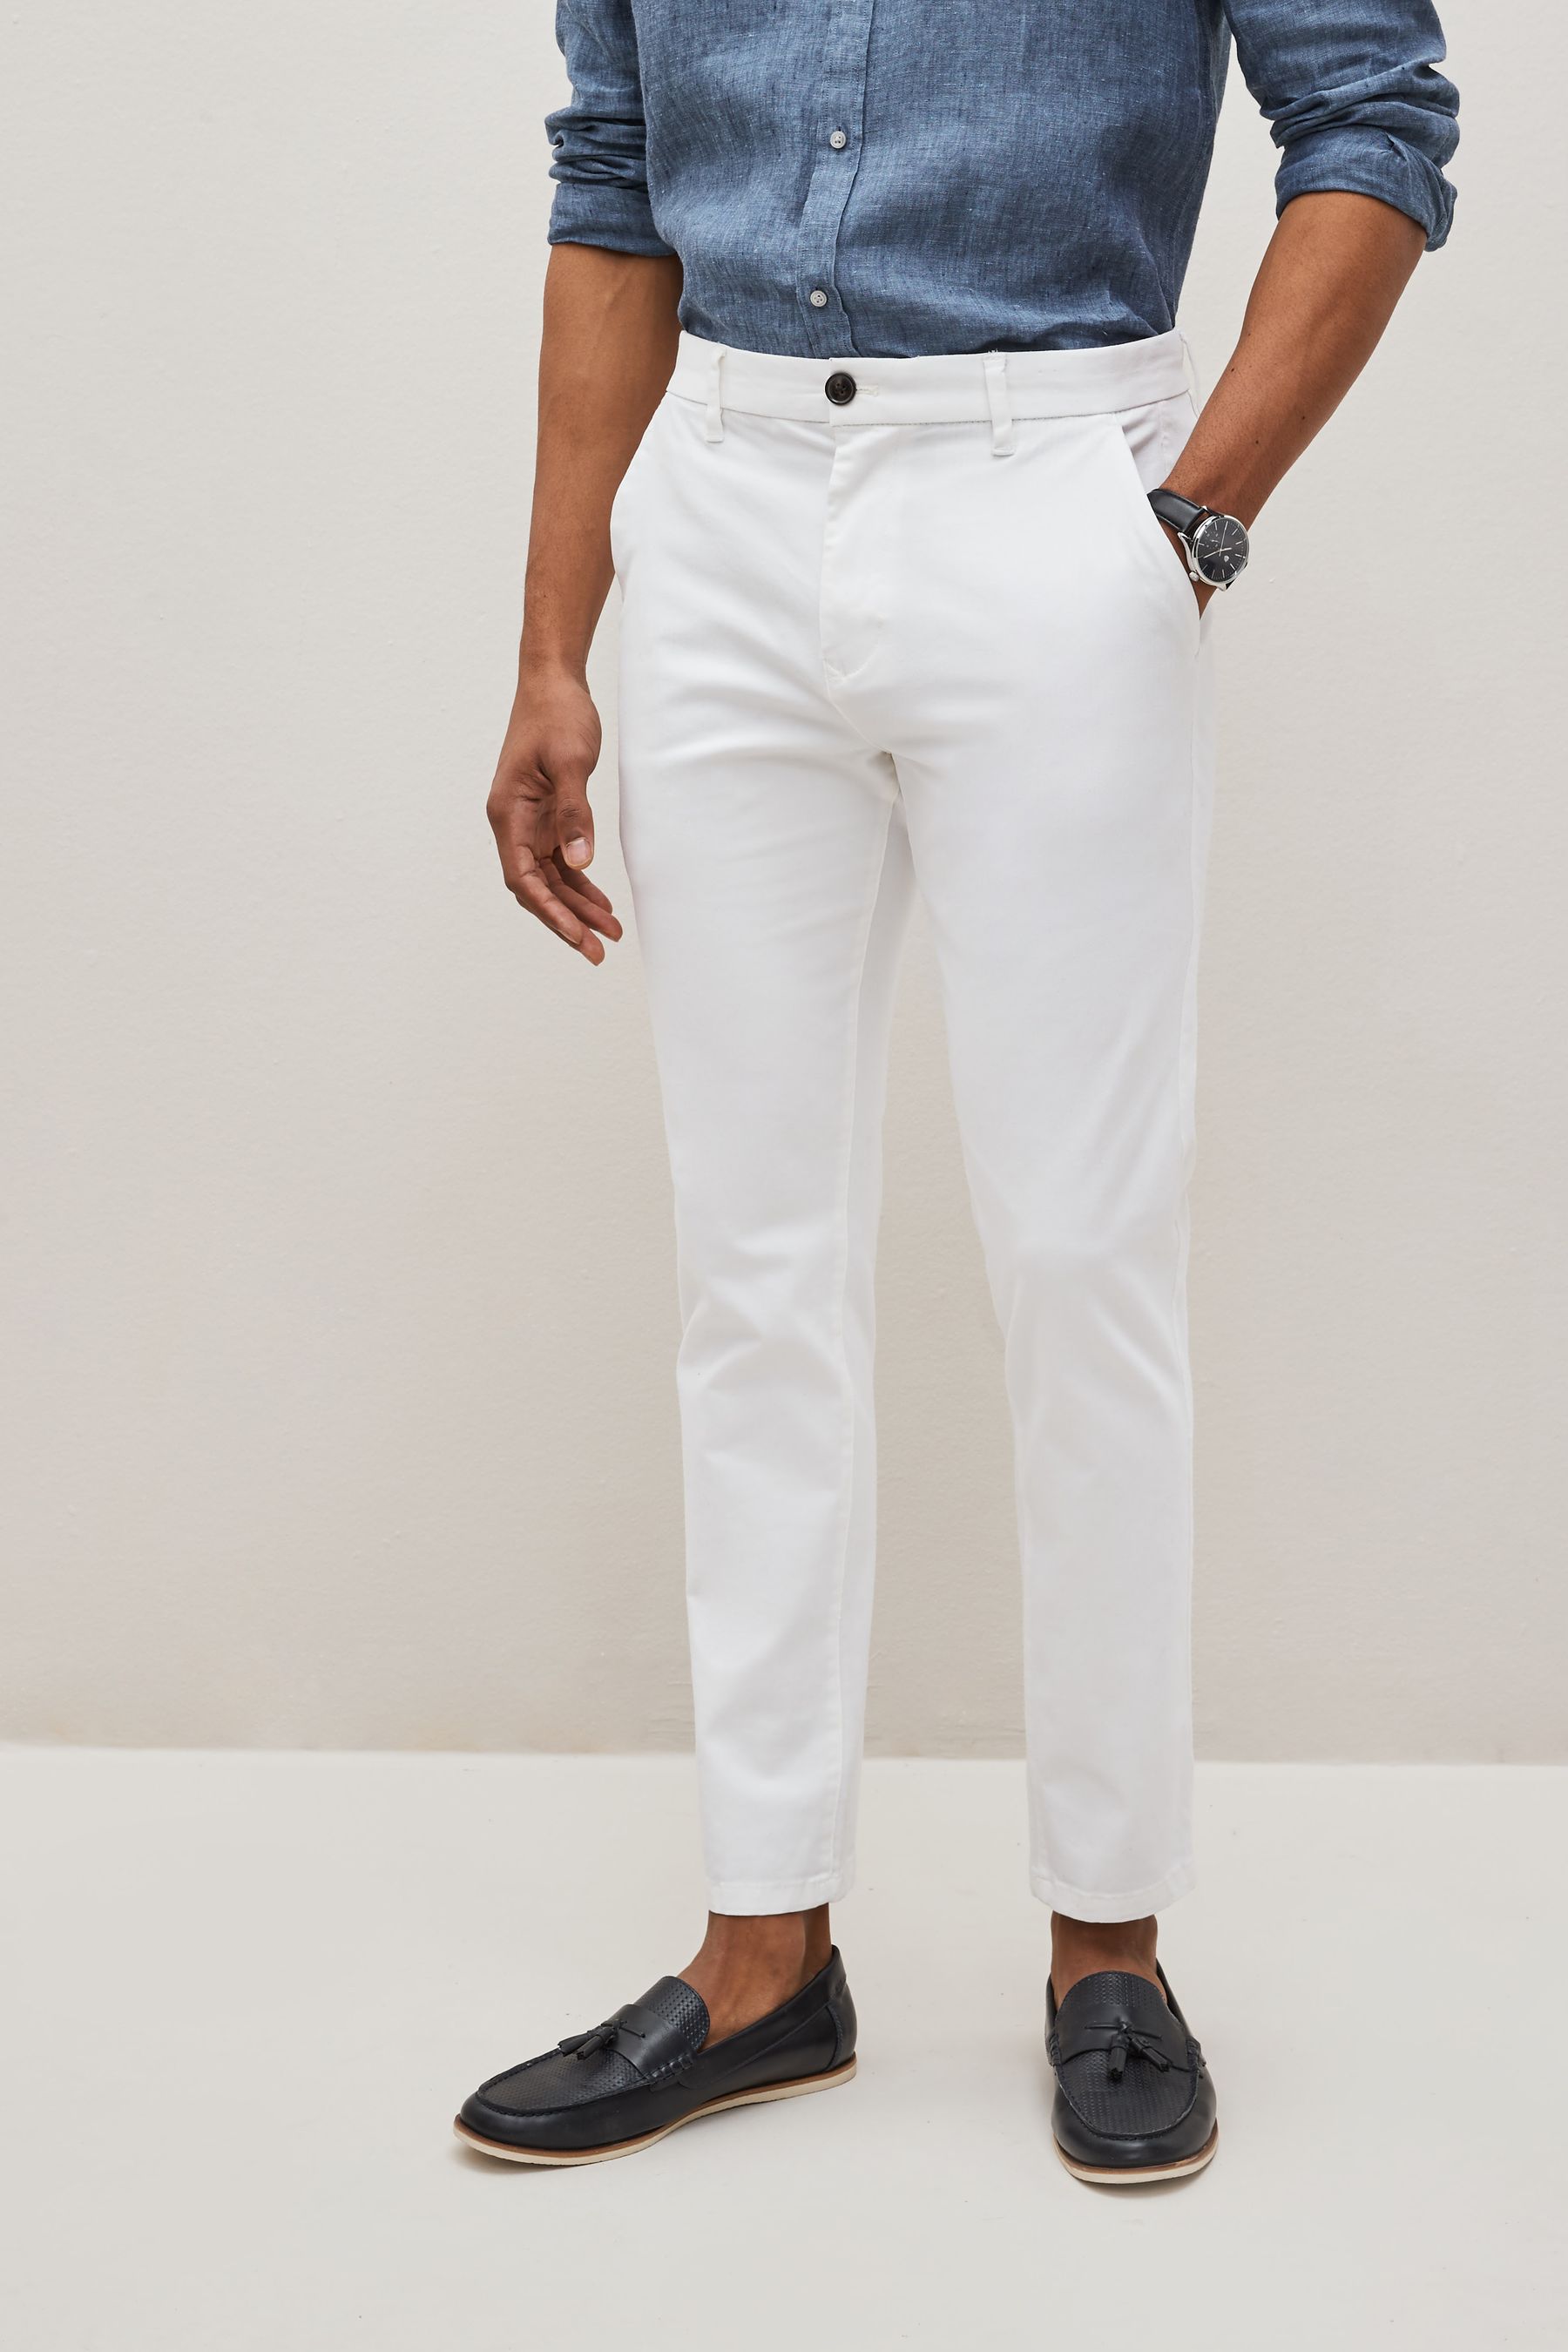 Men's Chinos & Trousers | Casual Chinos | Wrangler UK